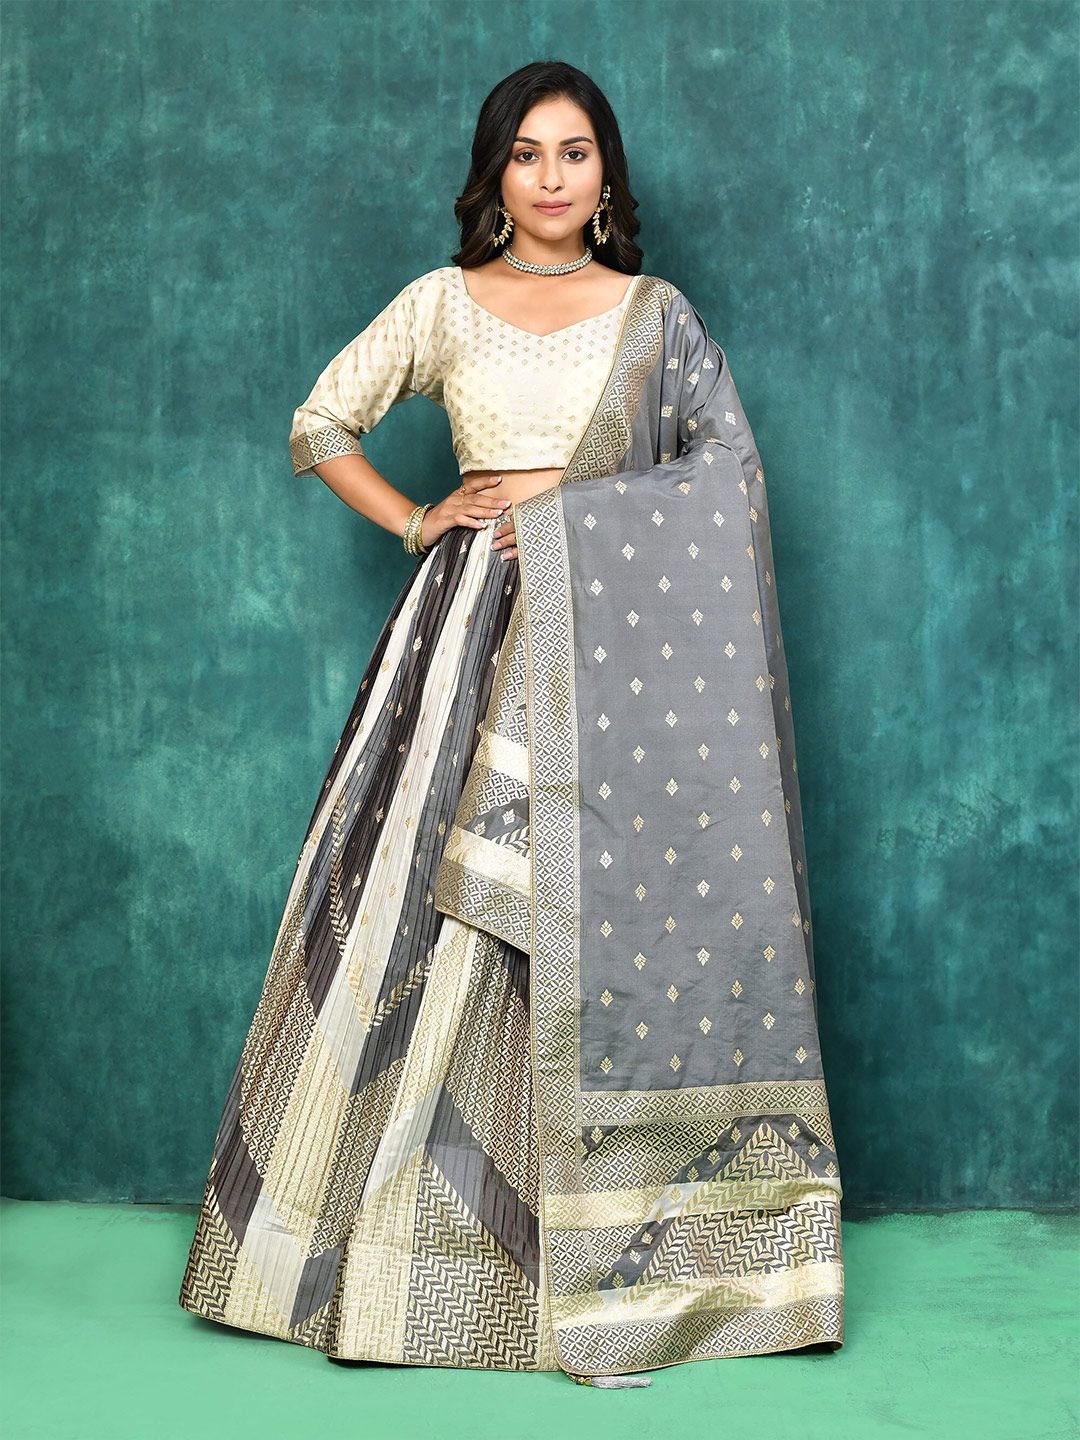 elora Ethnnic Motif Woven Design Semi Stitched Lehenga & Unstitched Blouse With Dupatta Price in India